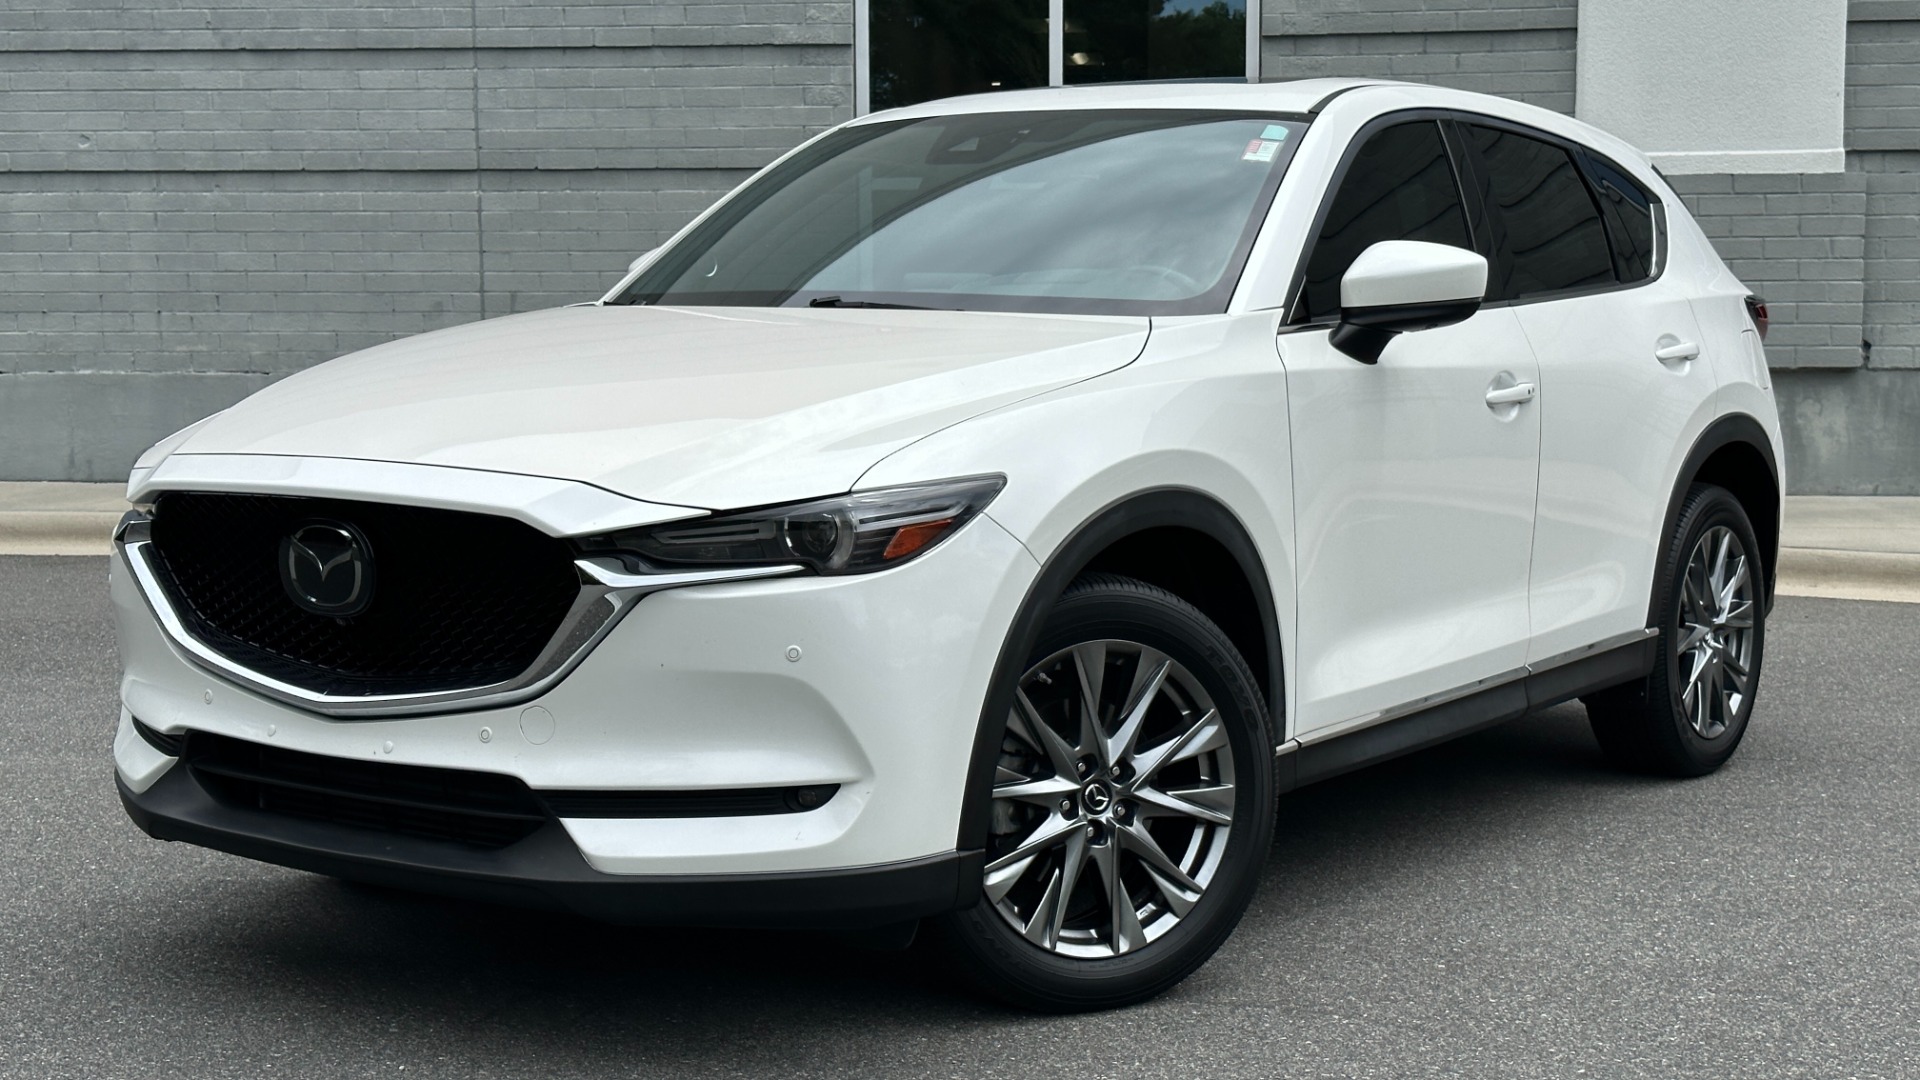 Used 2019 Mazda CX-5 Signature for sale $26,495 at Formula Imports in Charlotte NC 28227 1